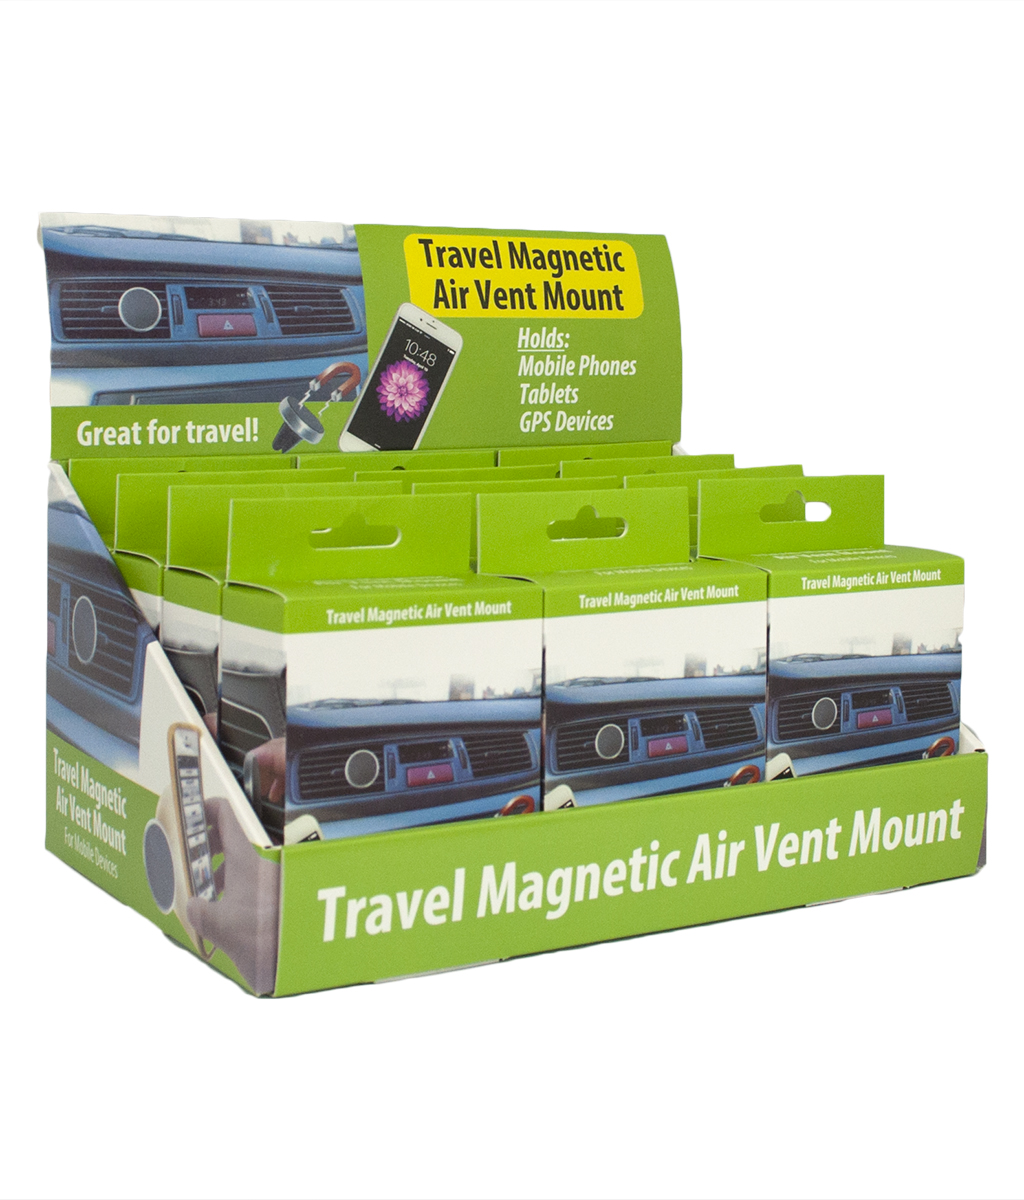 Travel Magnetic Vent Mount display